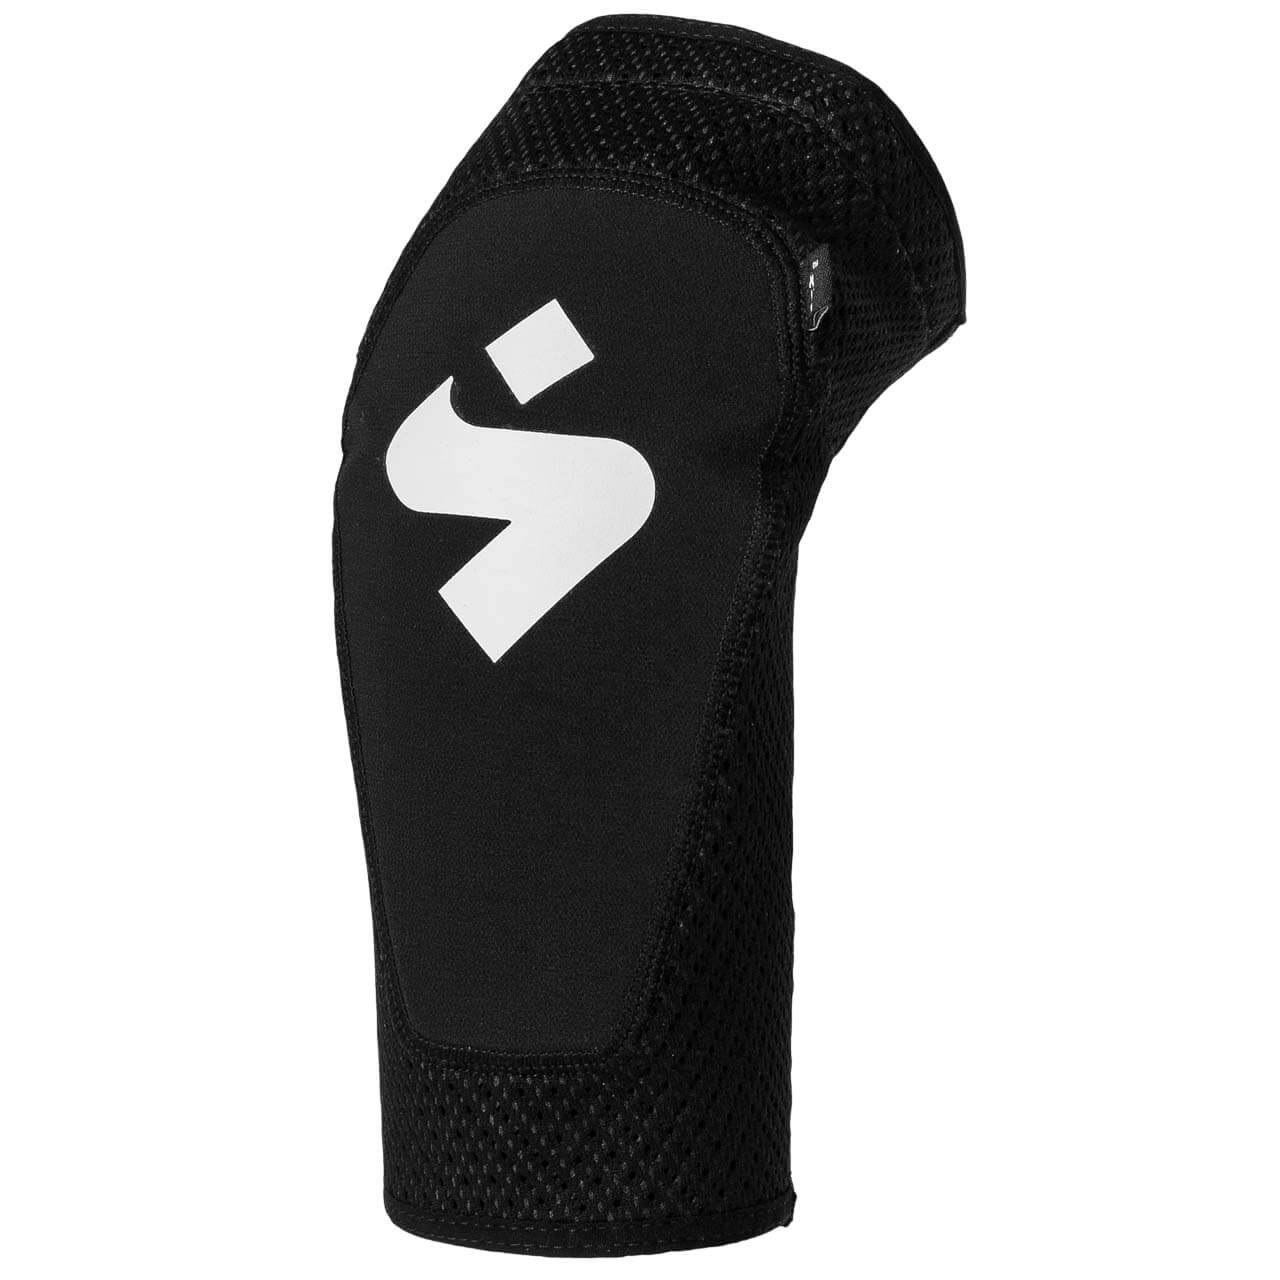 Sweet Protection Elbow Guards Light - Black, XL